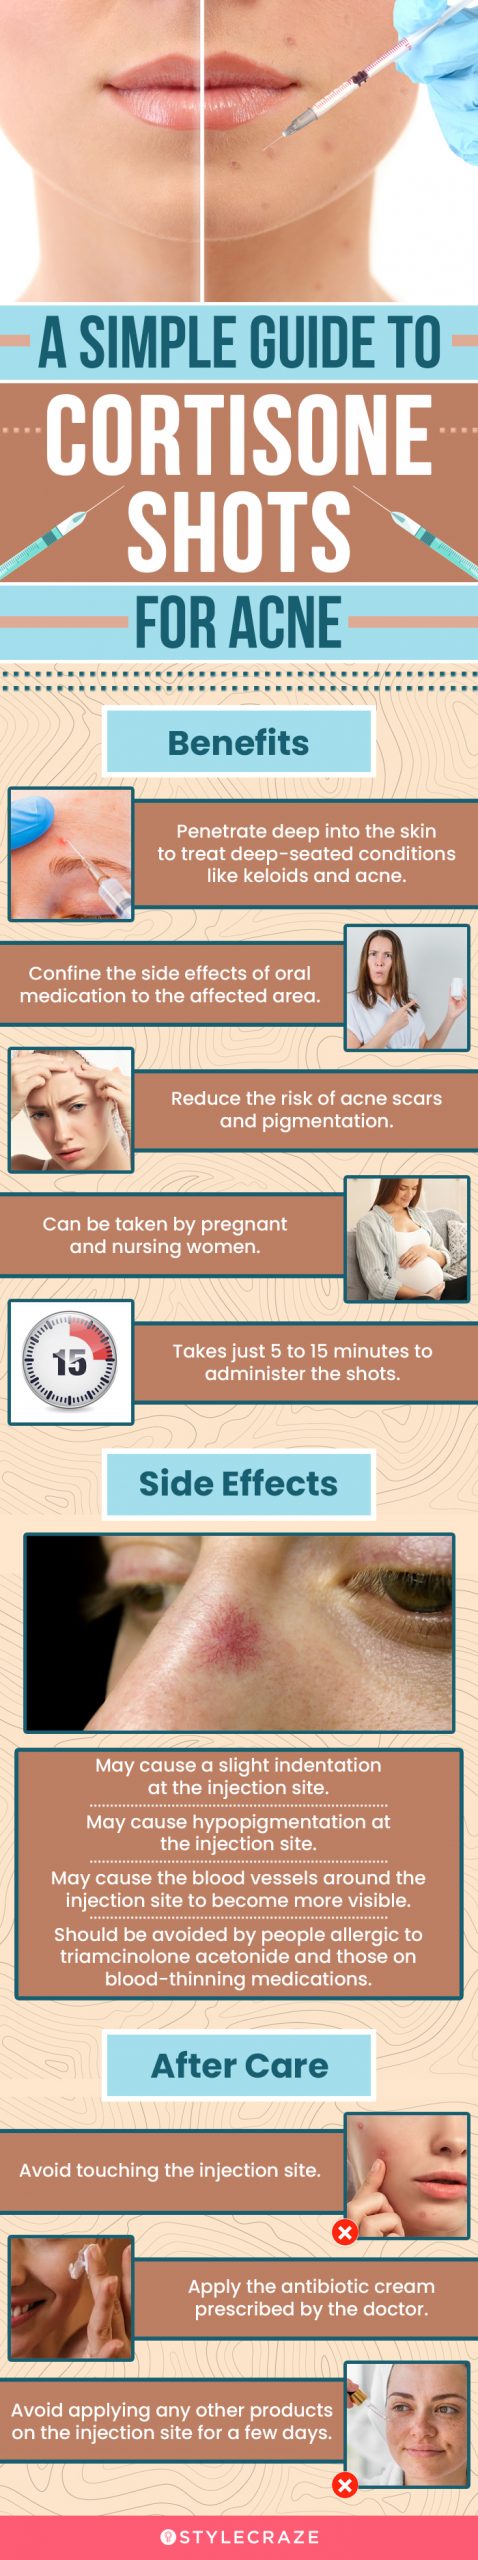 a simple guide to cortisone shots for acne (infographic)